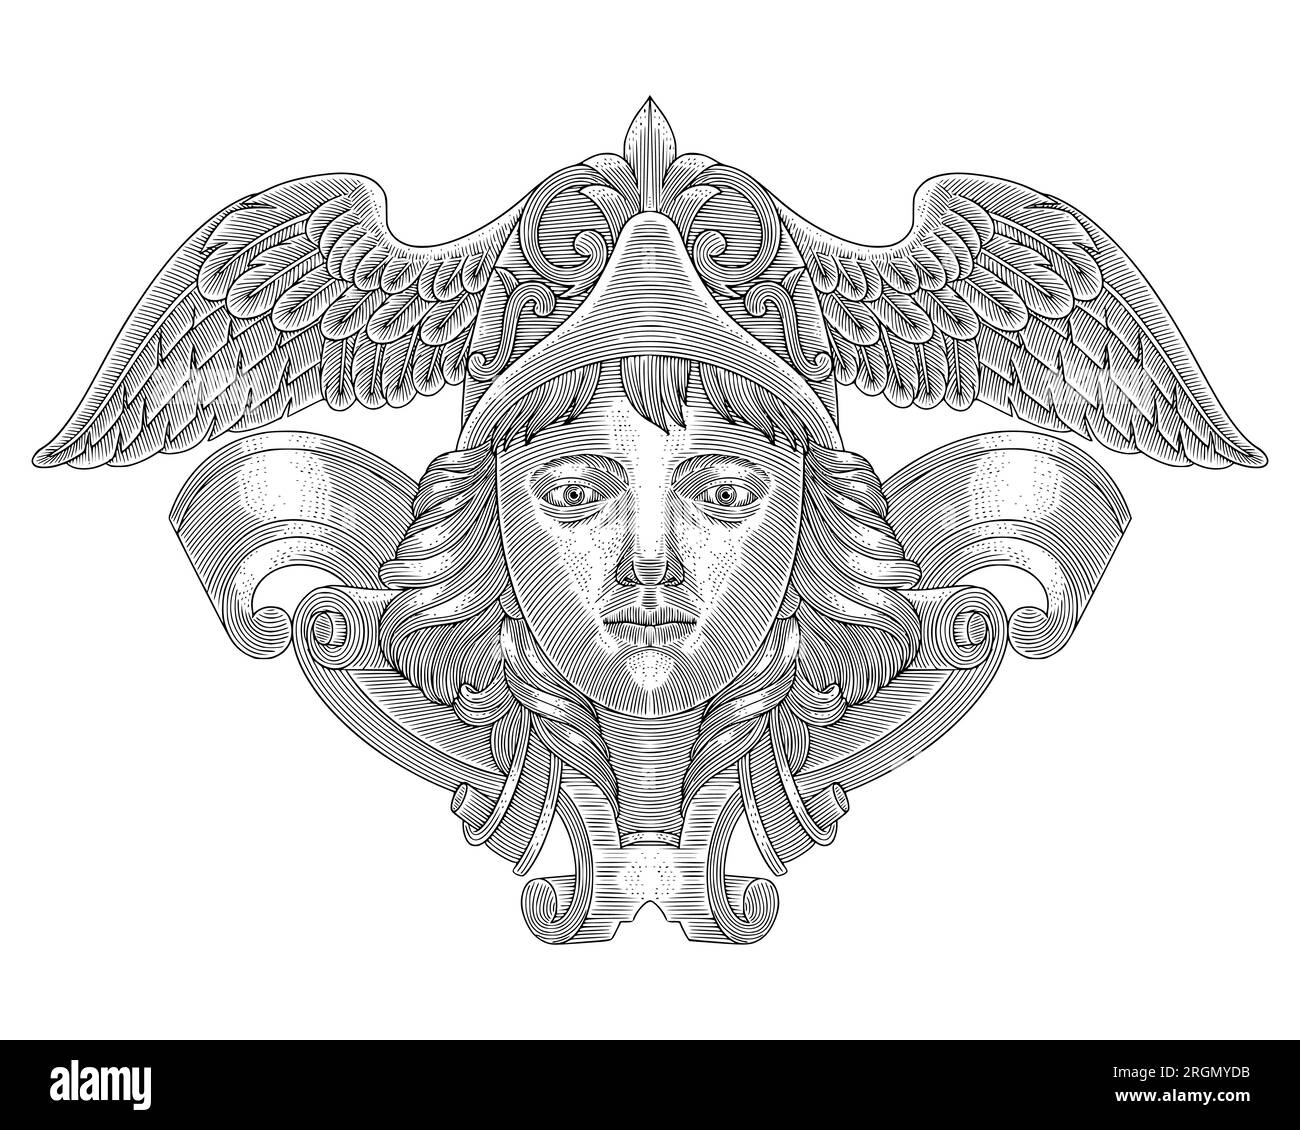 Archangel michael head, Vintage engraving drawing style vector illustration Stock Vector